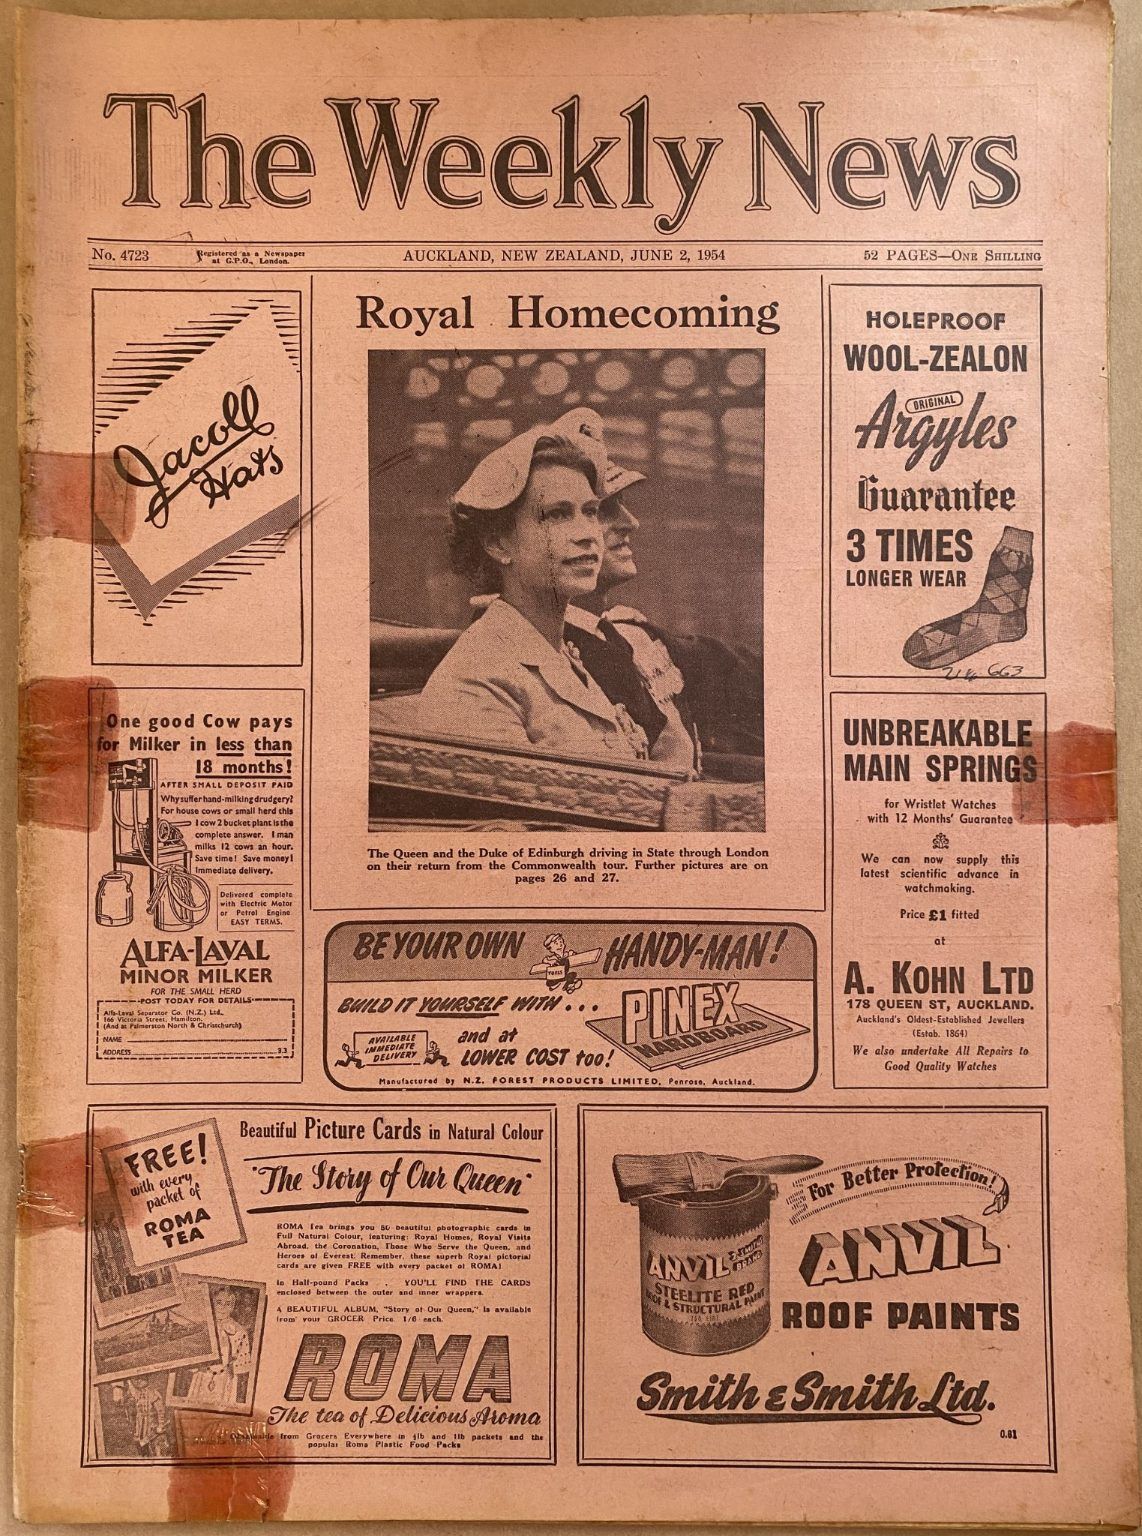 OLD NEWSPAPER: The Weekly News - No. 4723, 2 June 1954